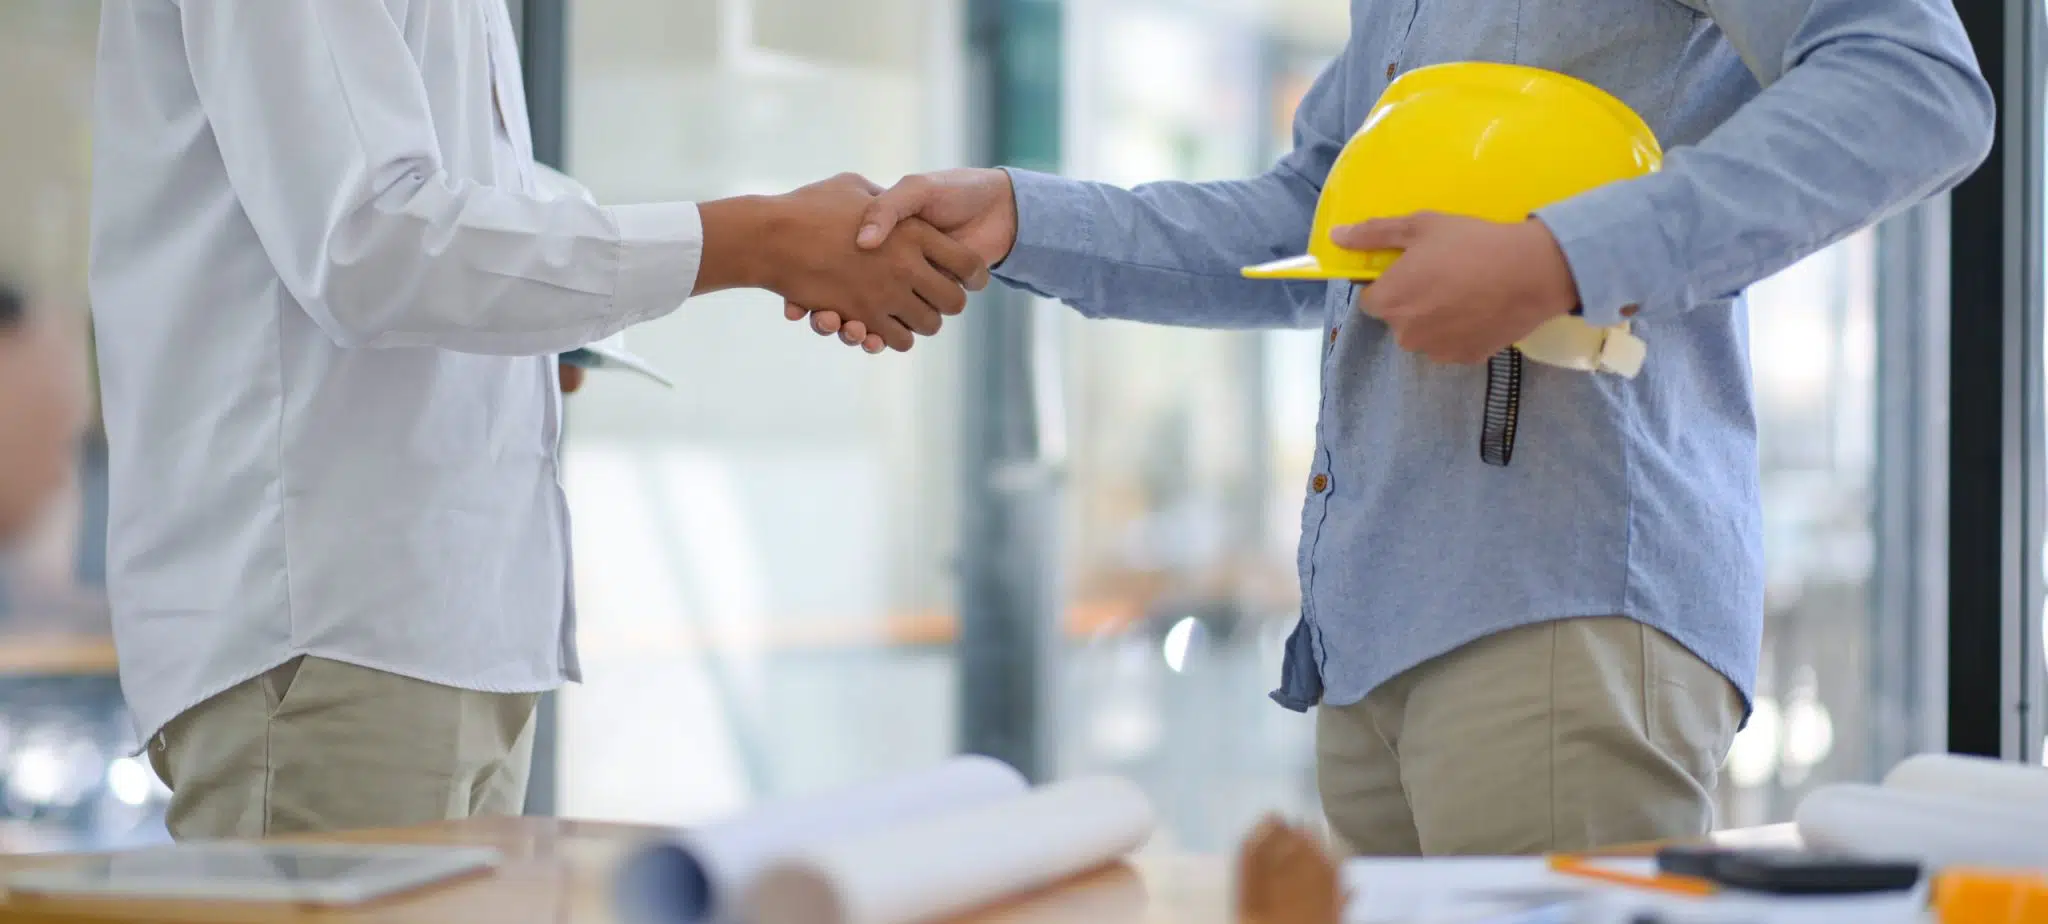 architects-and-contractors-shake-hands-to-work-FDM7NDA-scaled-1-2048x924.jpg-1